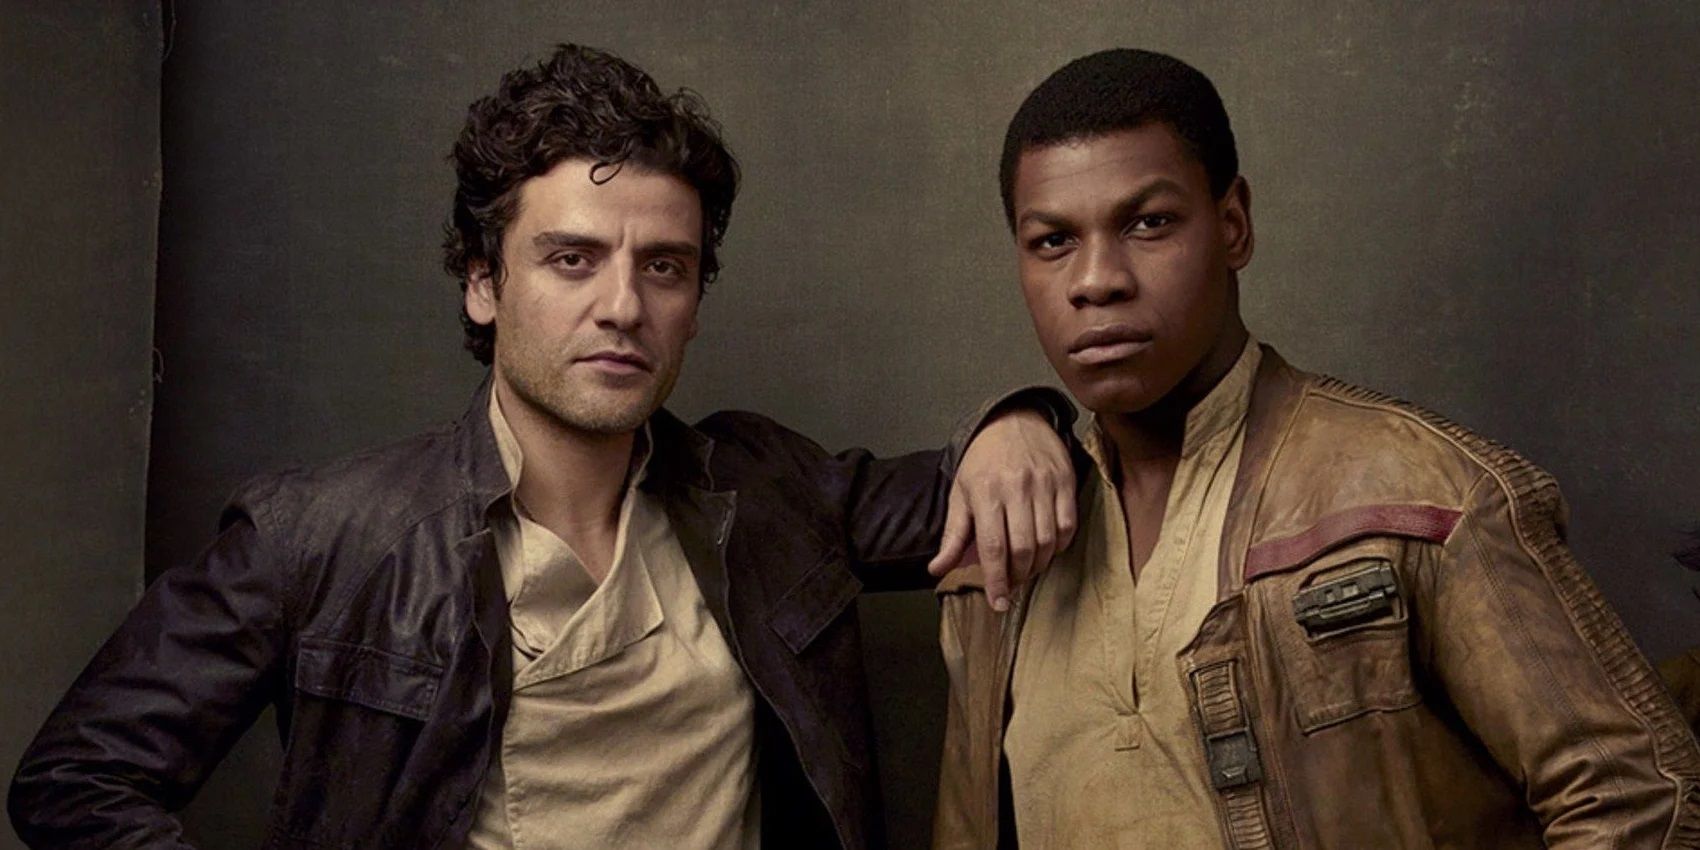 Star Wars 5 Ways Poe Was An Underrated Character (& 5 He Was Overrated)